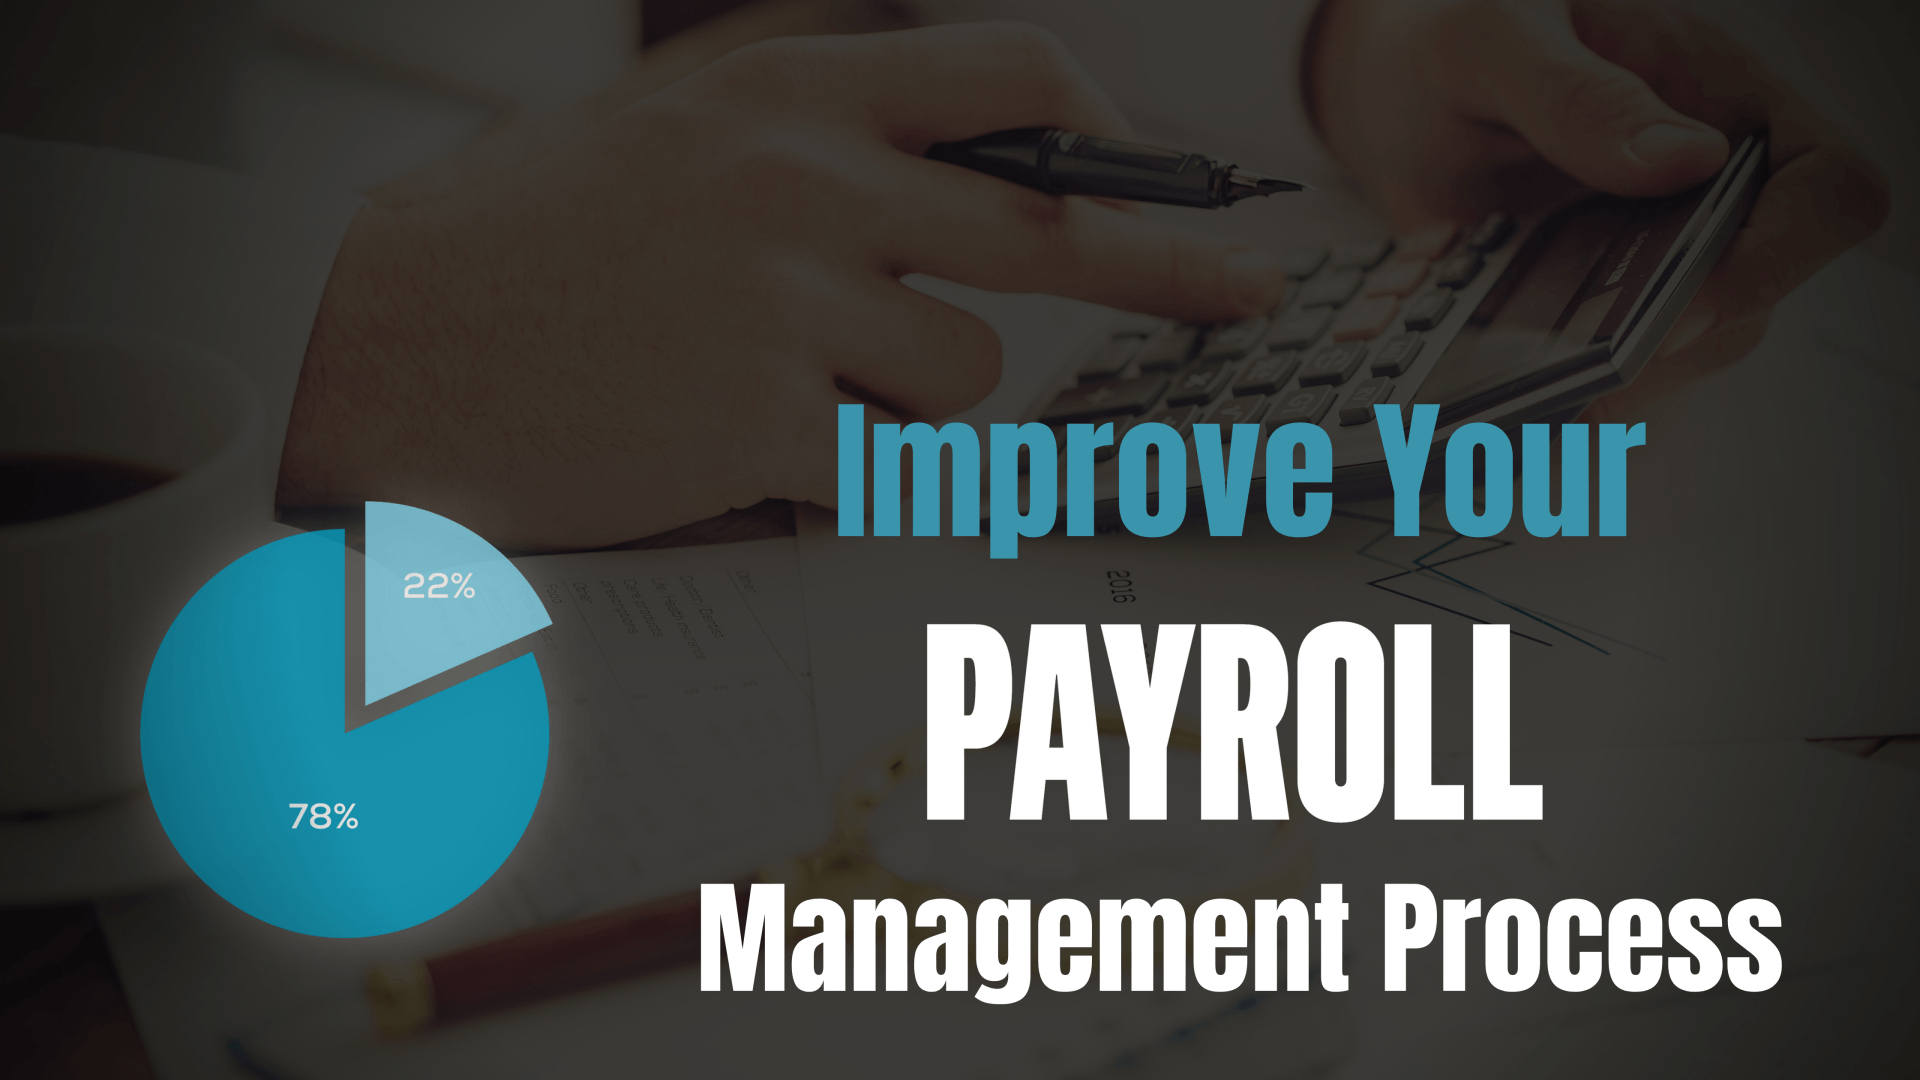 Improve Your Payroll Management Process